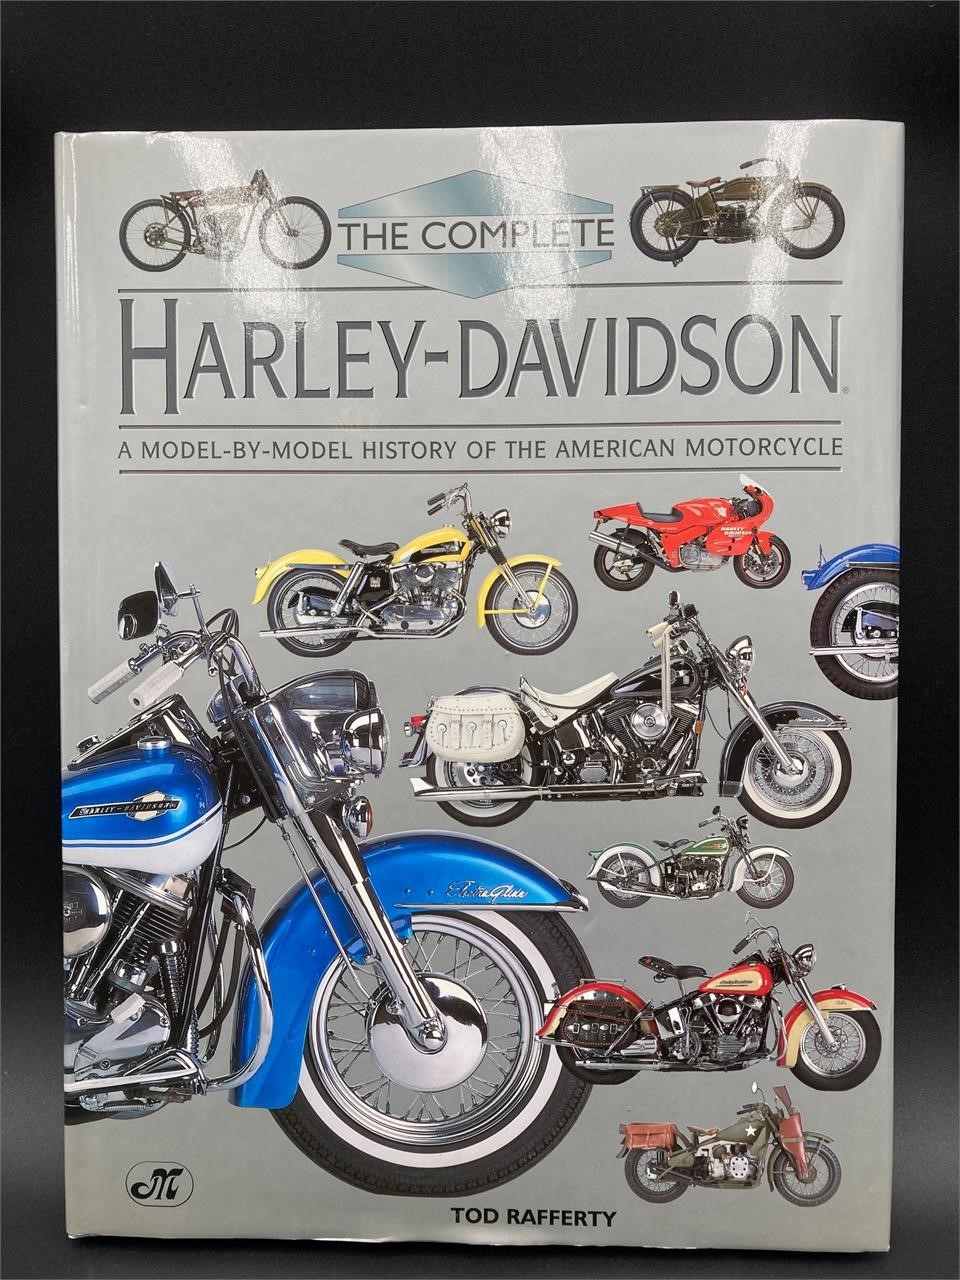 The Complete Harley-Davidson Book